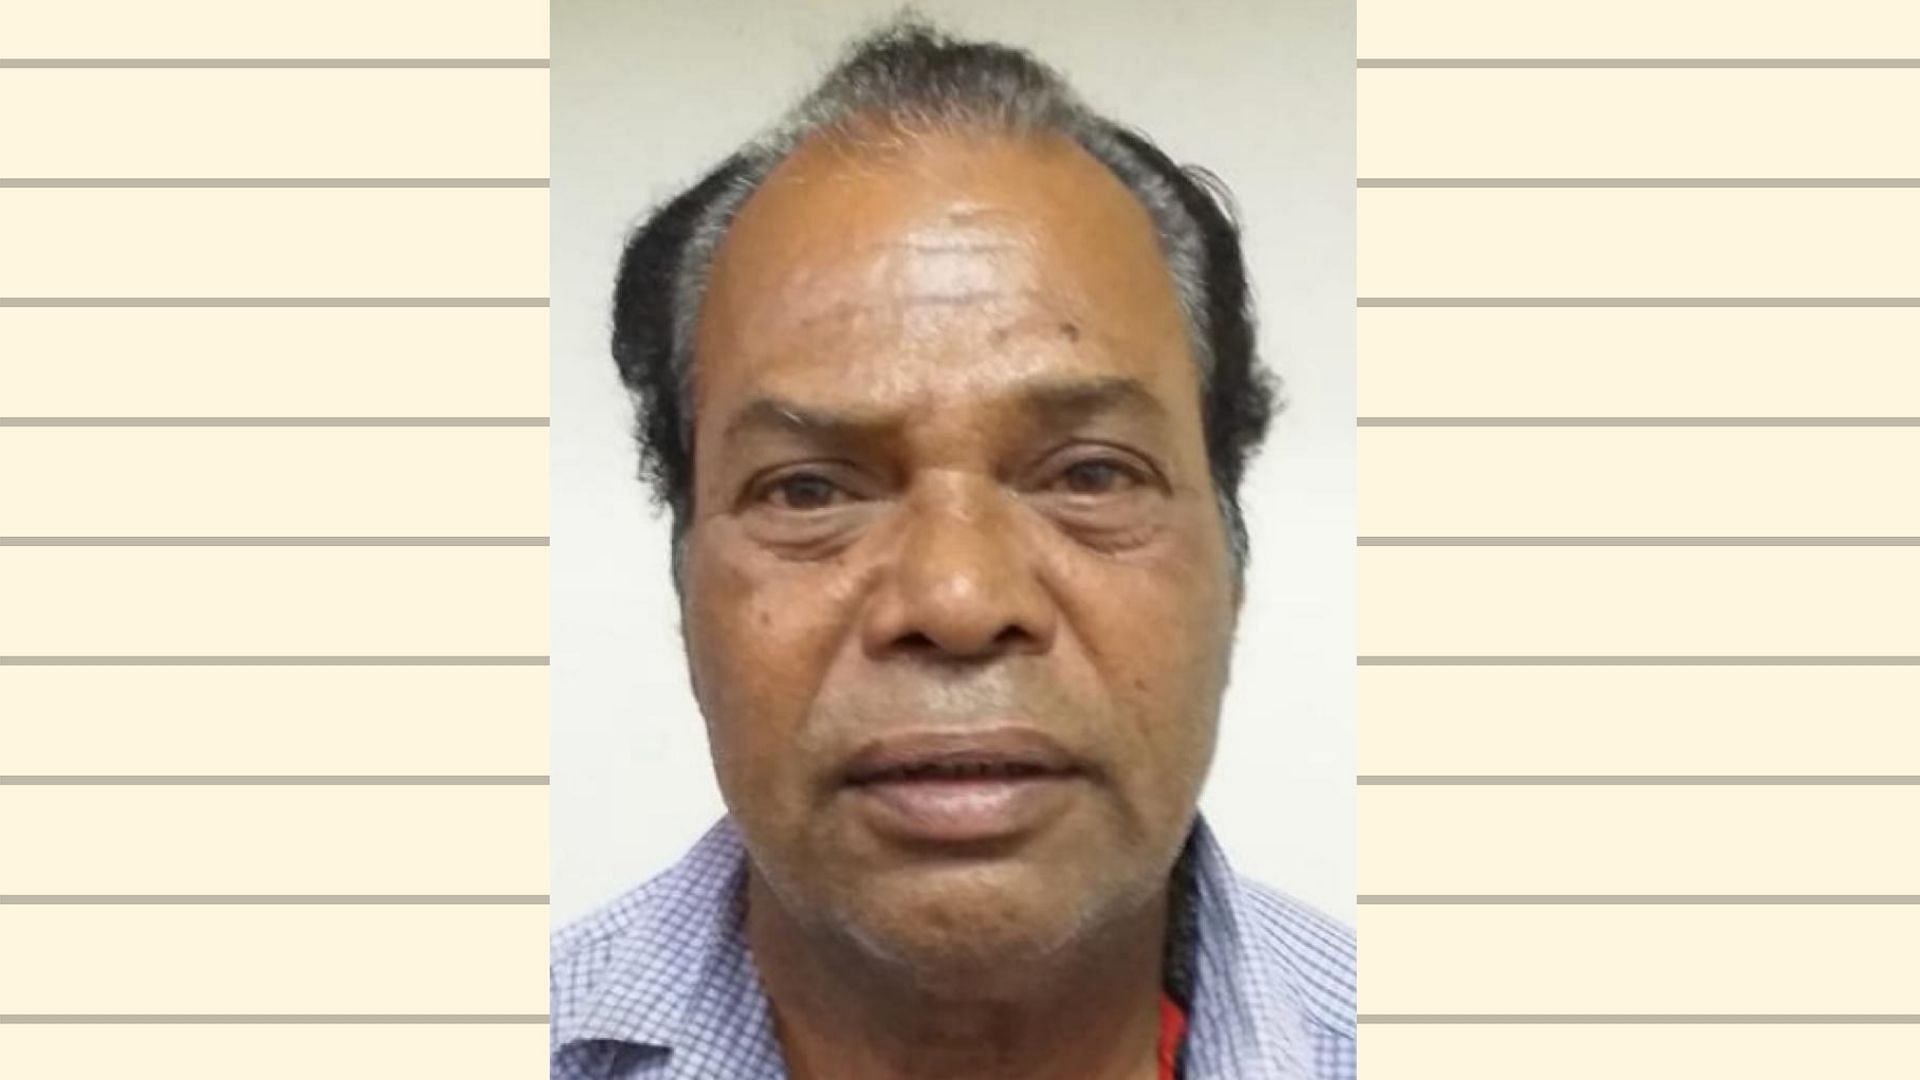 65-year-old Swamy Sundara Murthy has been arrested by Bengaluru police for making a hoax call about a terror threat.